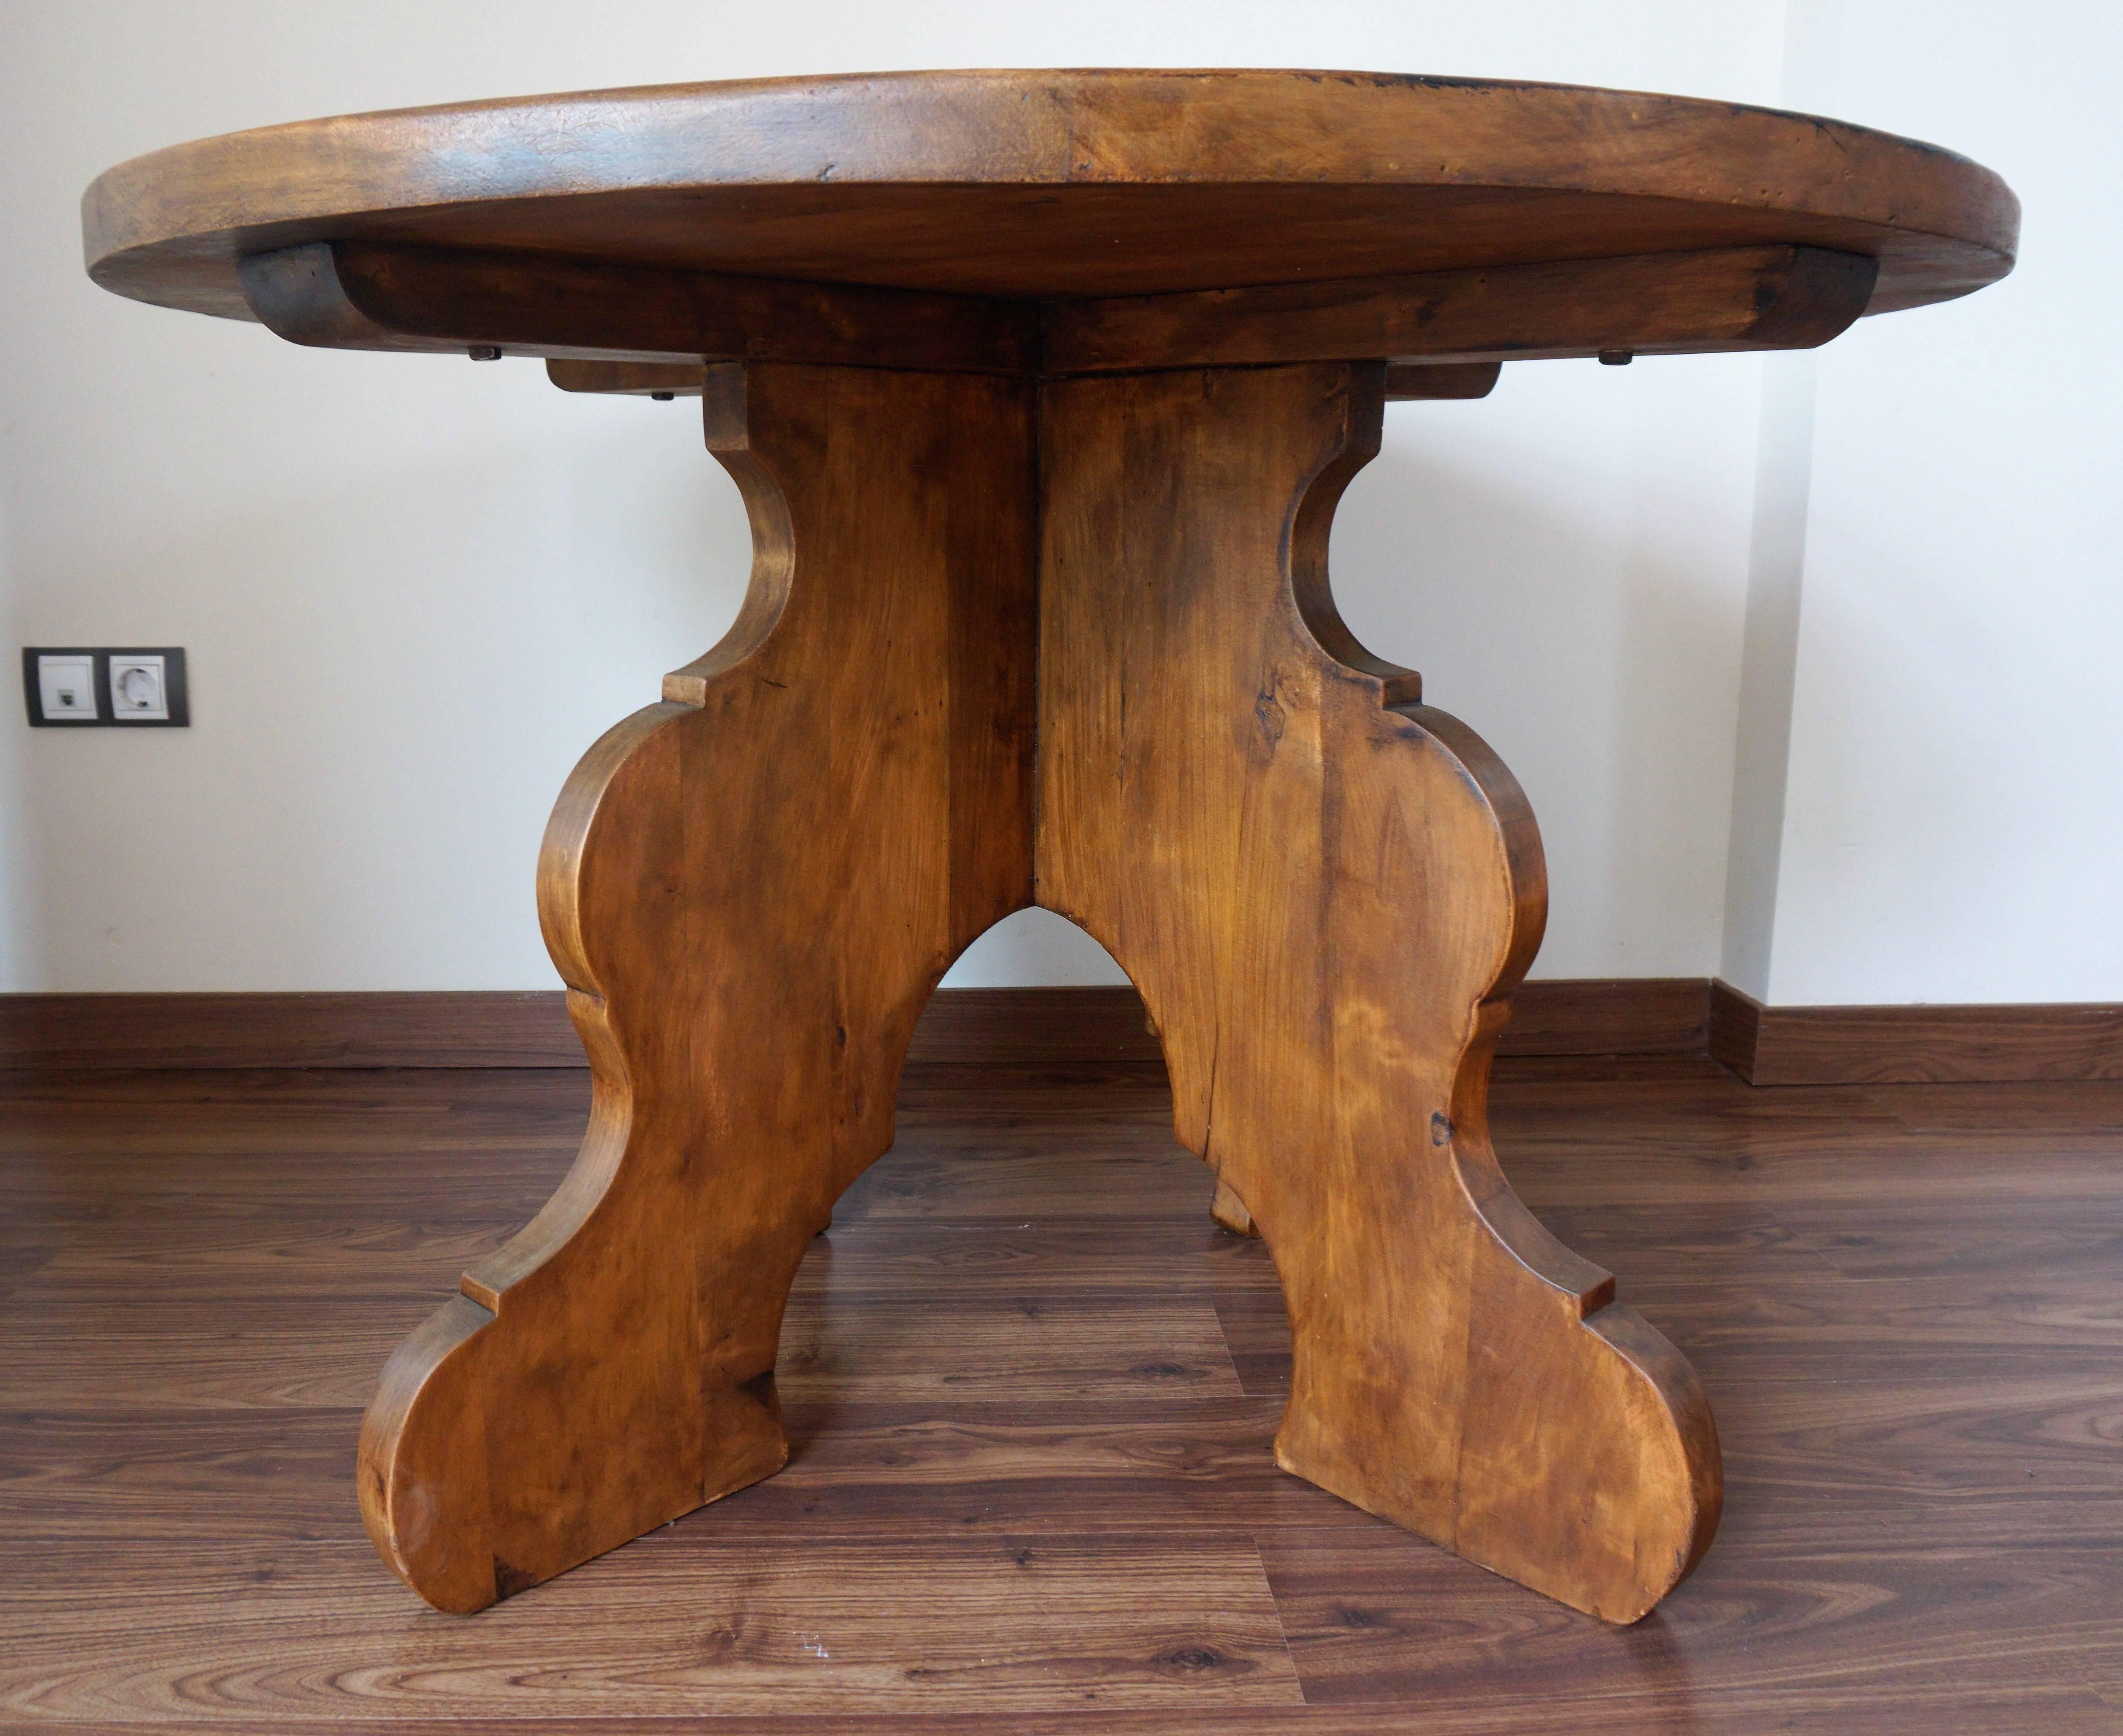 20th century rustic round coffee table or side table.